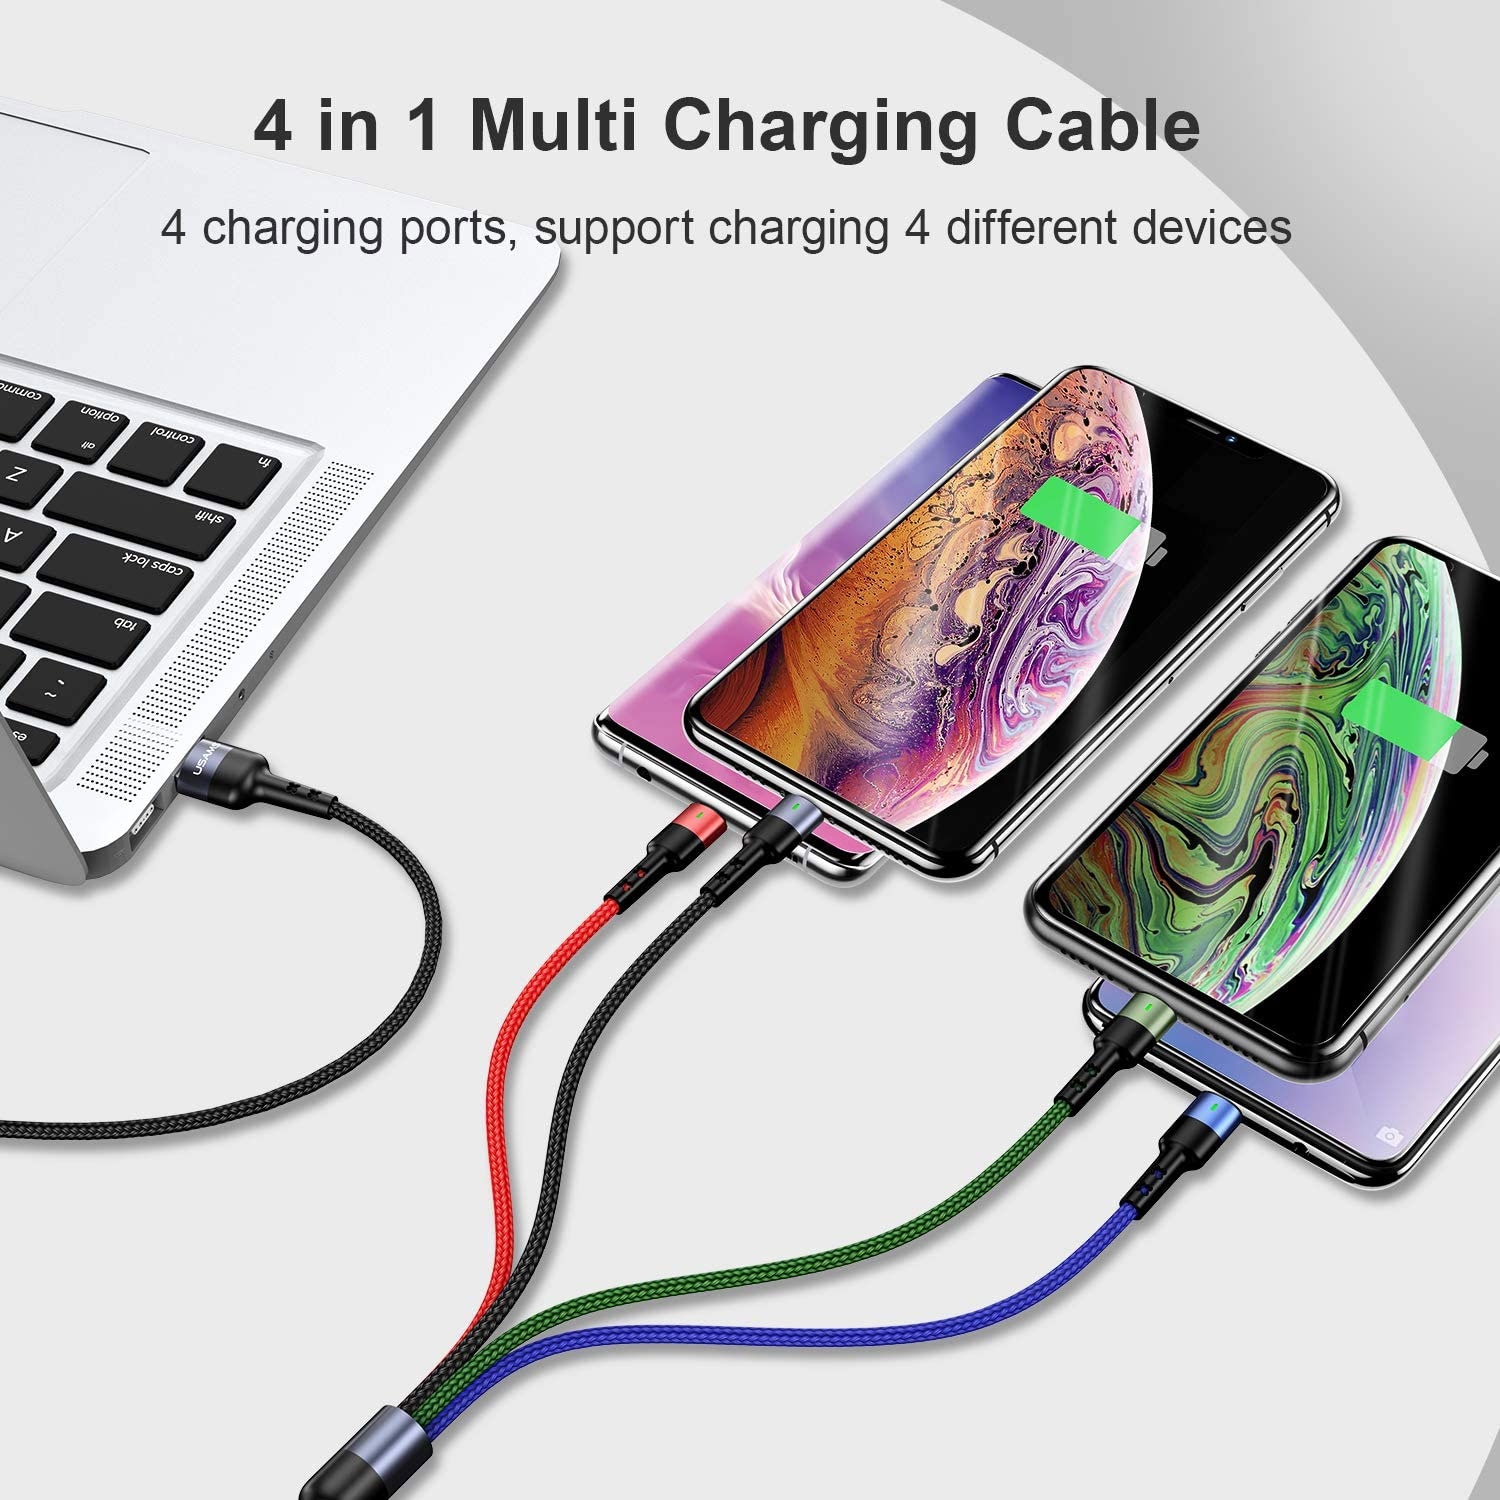 4-in-1 Nylon Braided 4' Charging Cable